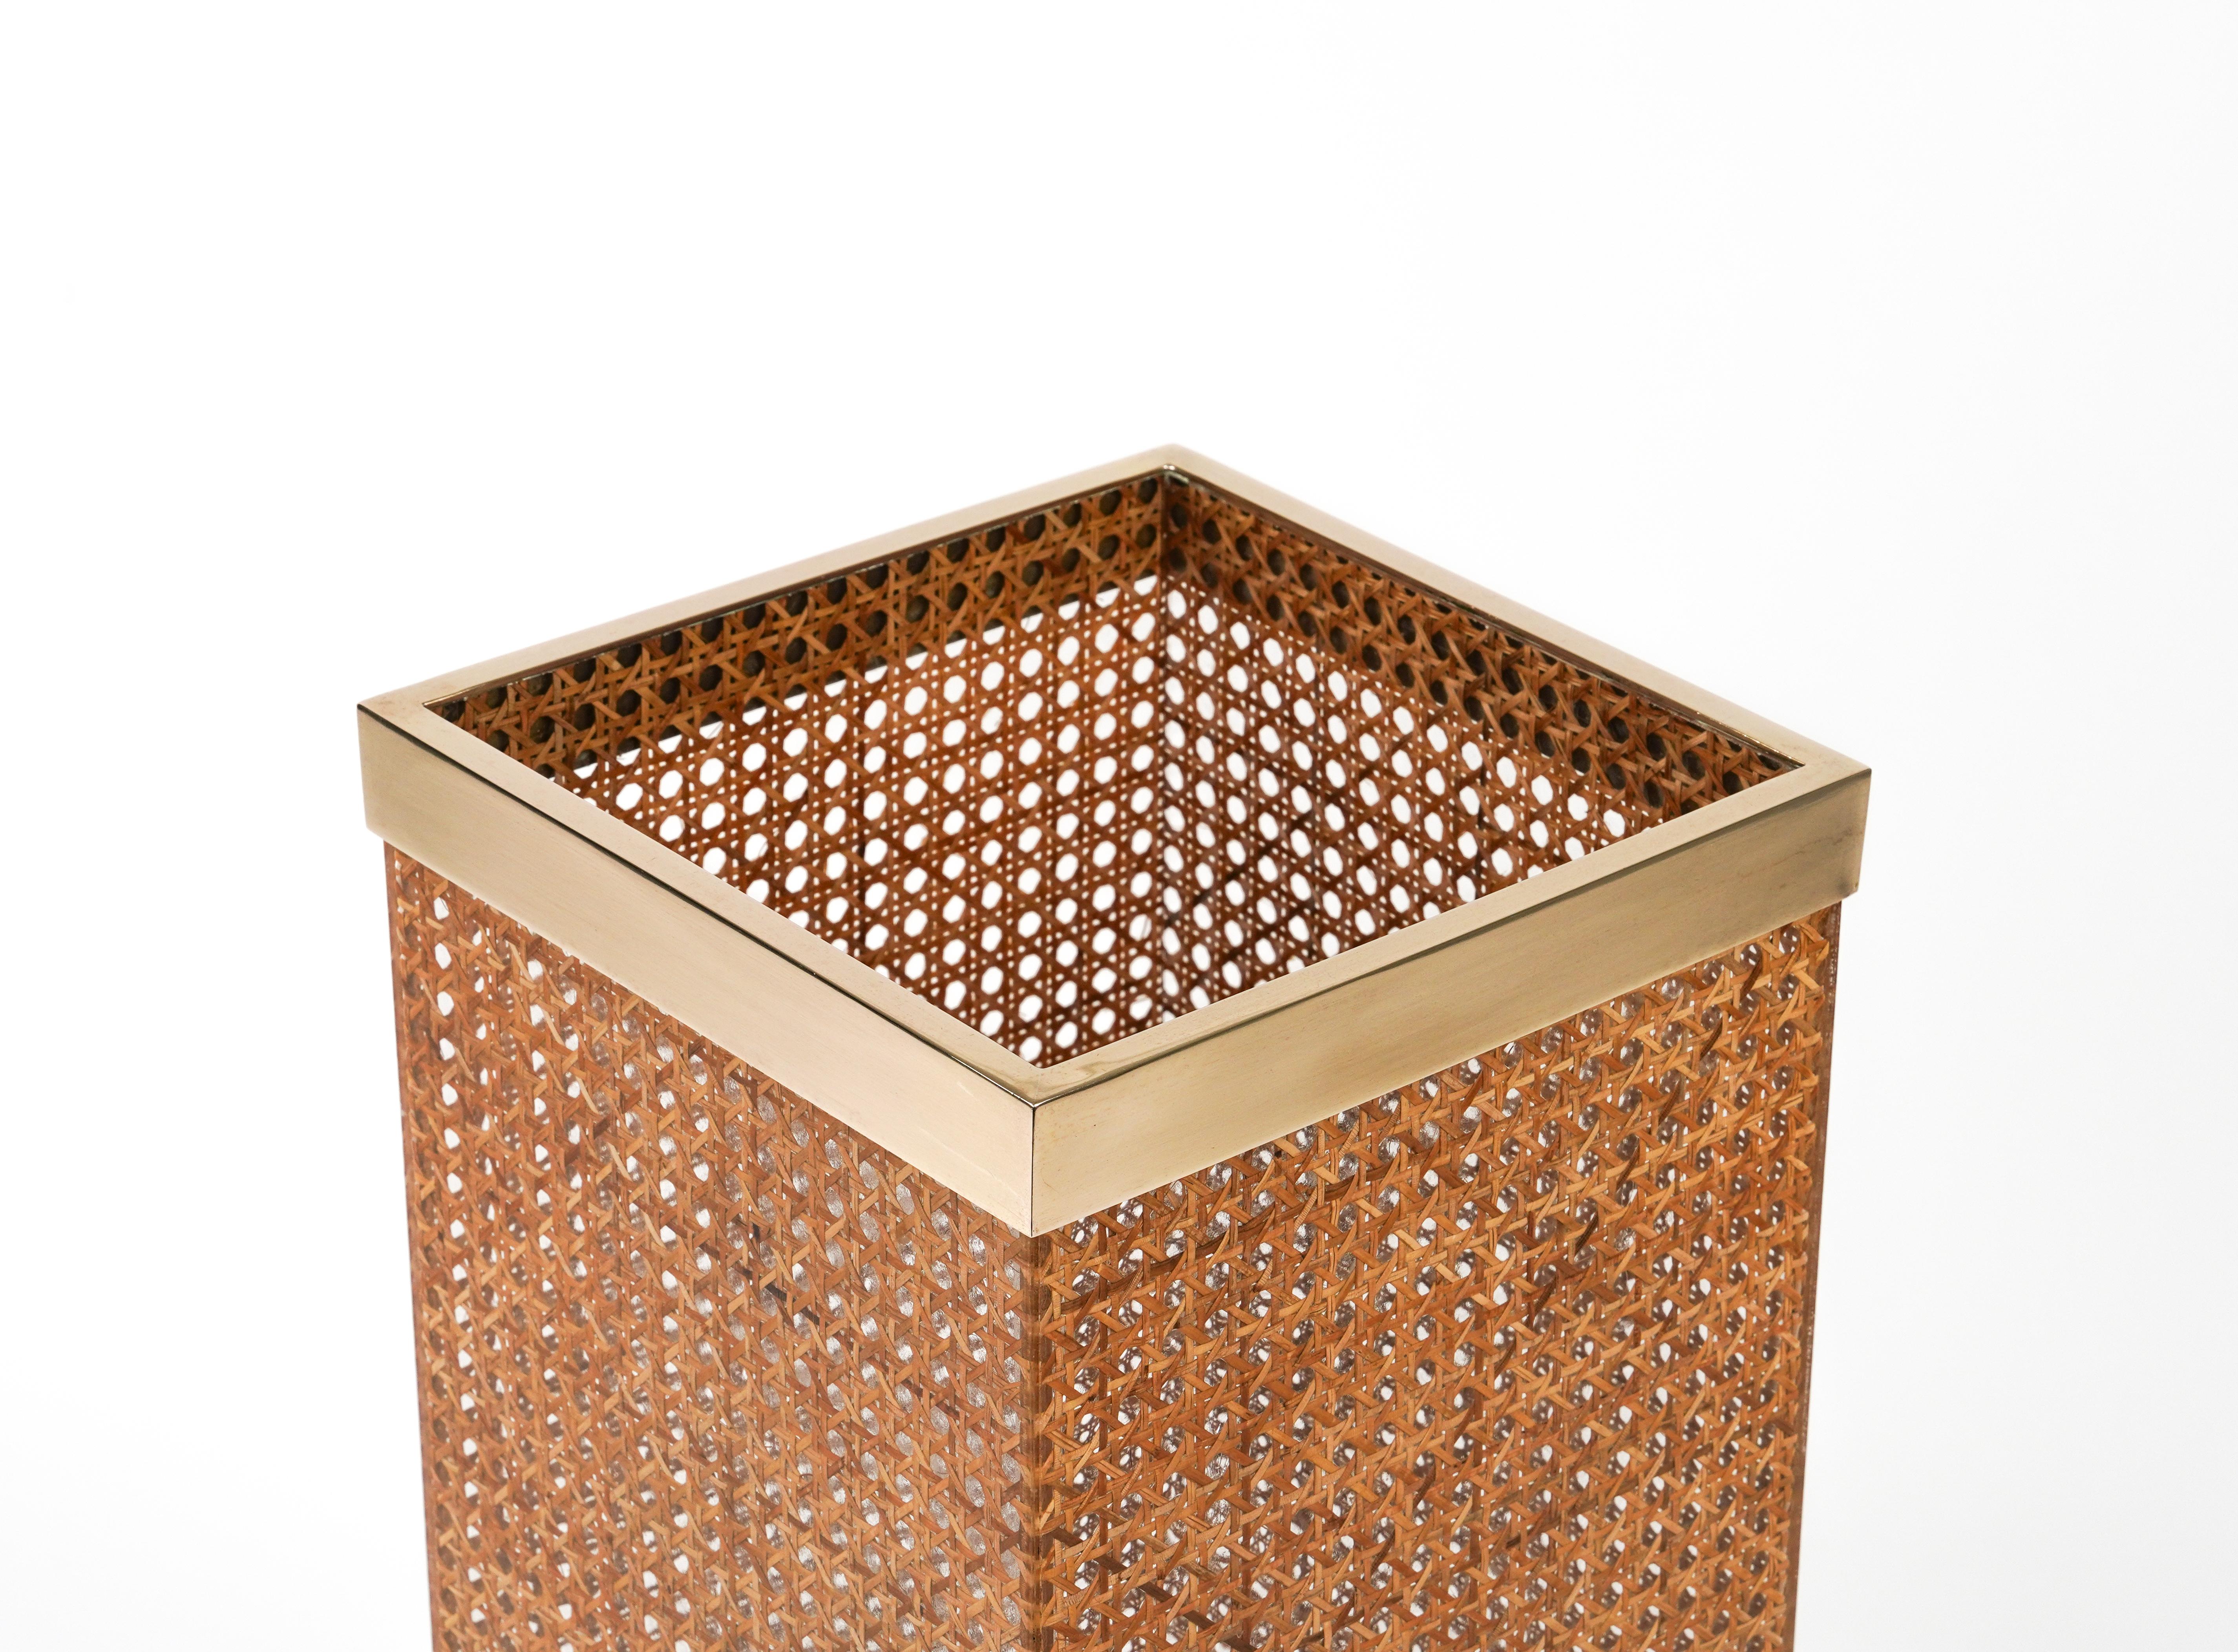 Umbrella Stand in Lucite, Rattan and Brass Christian Dior Style, Italy 1970s For Sale 4